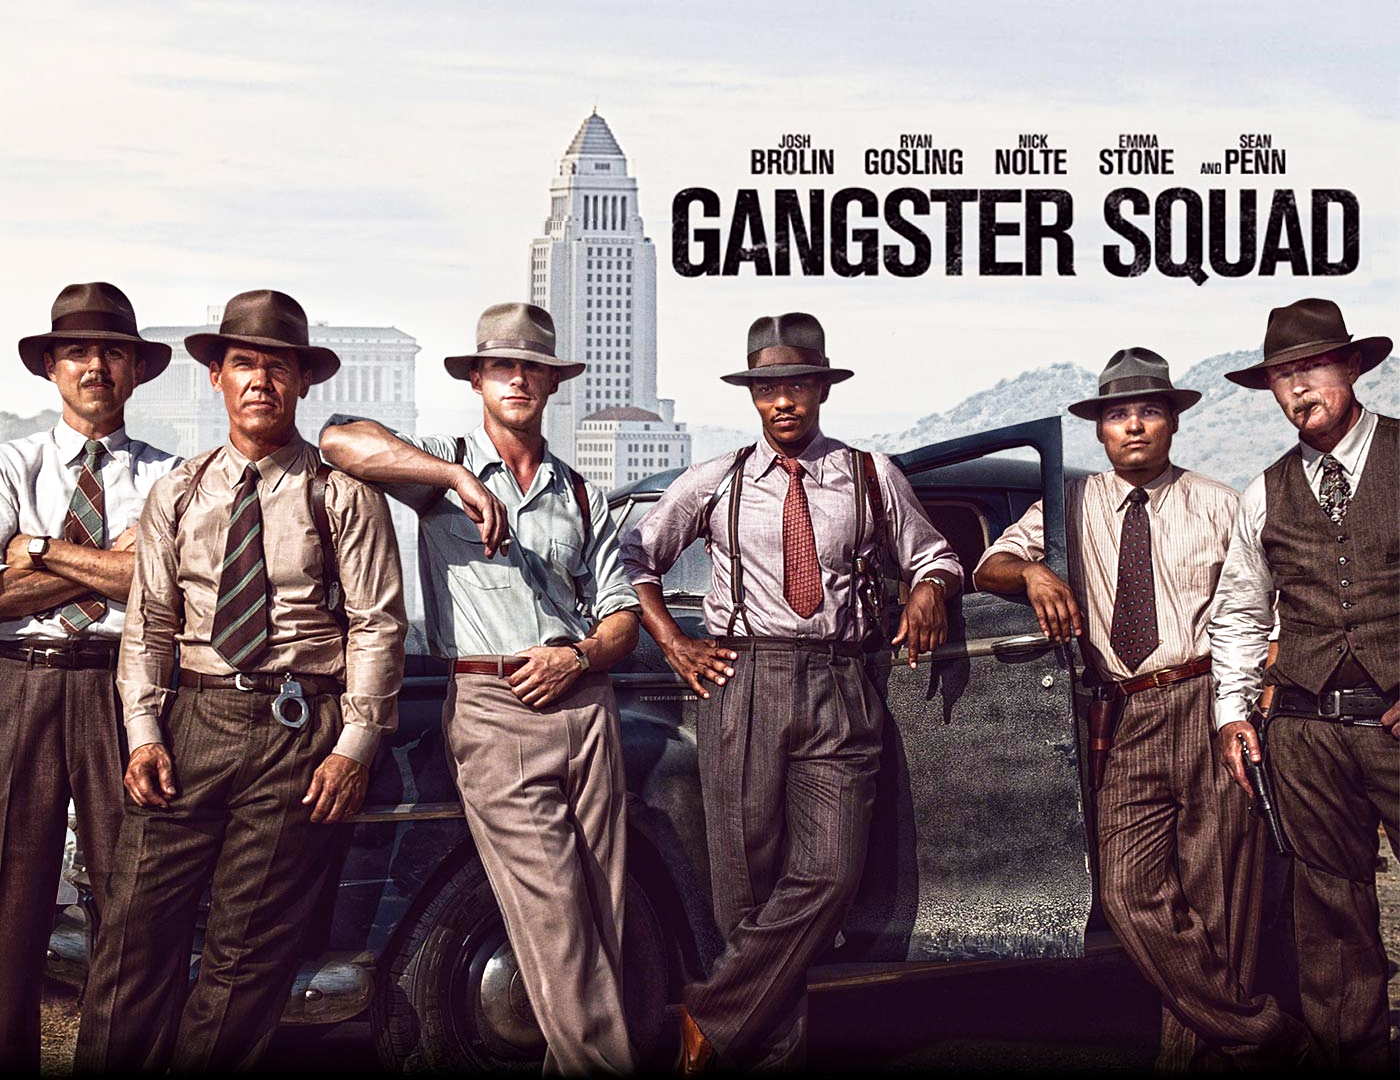 and Picture Gallery: Gangster, by Rebekah Nesler for mobile and desktop